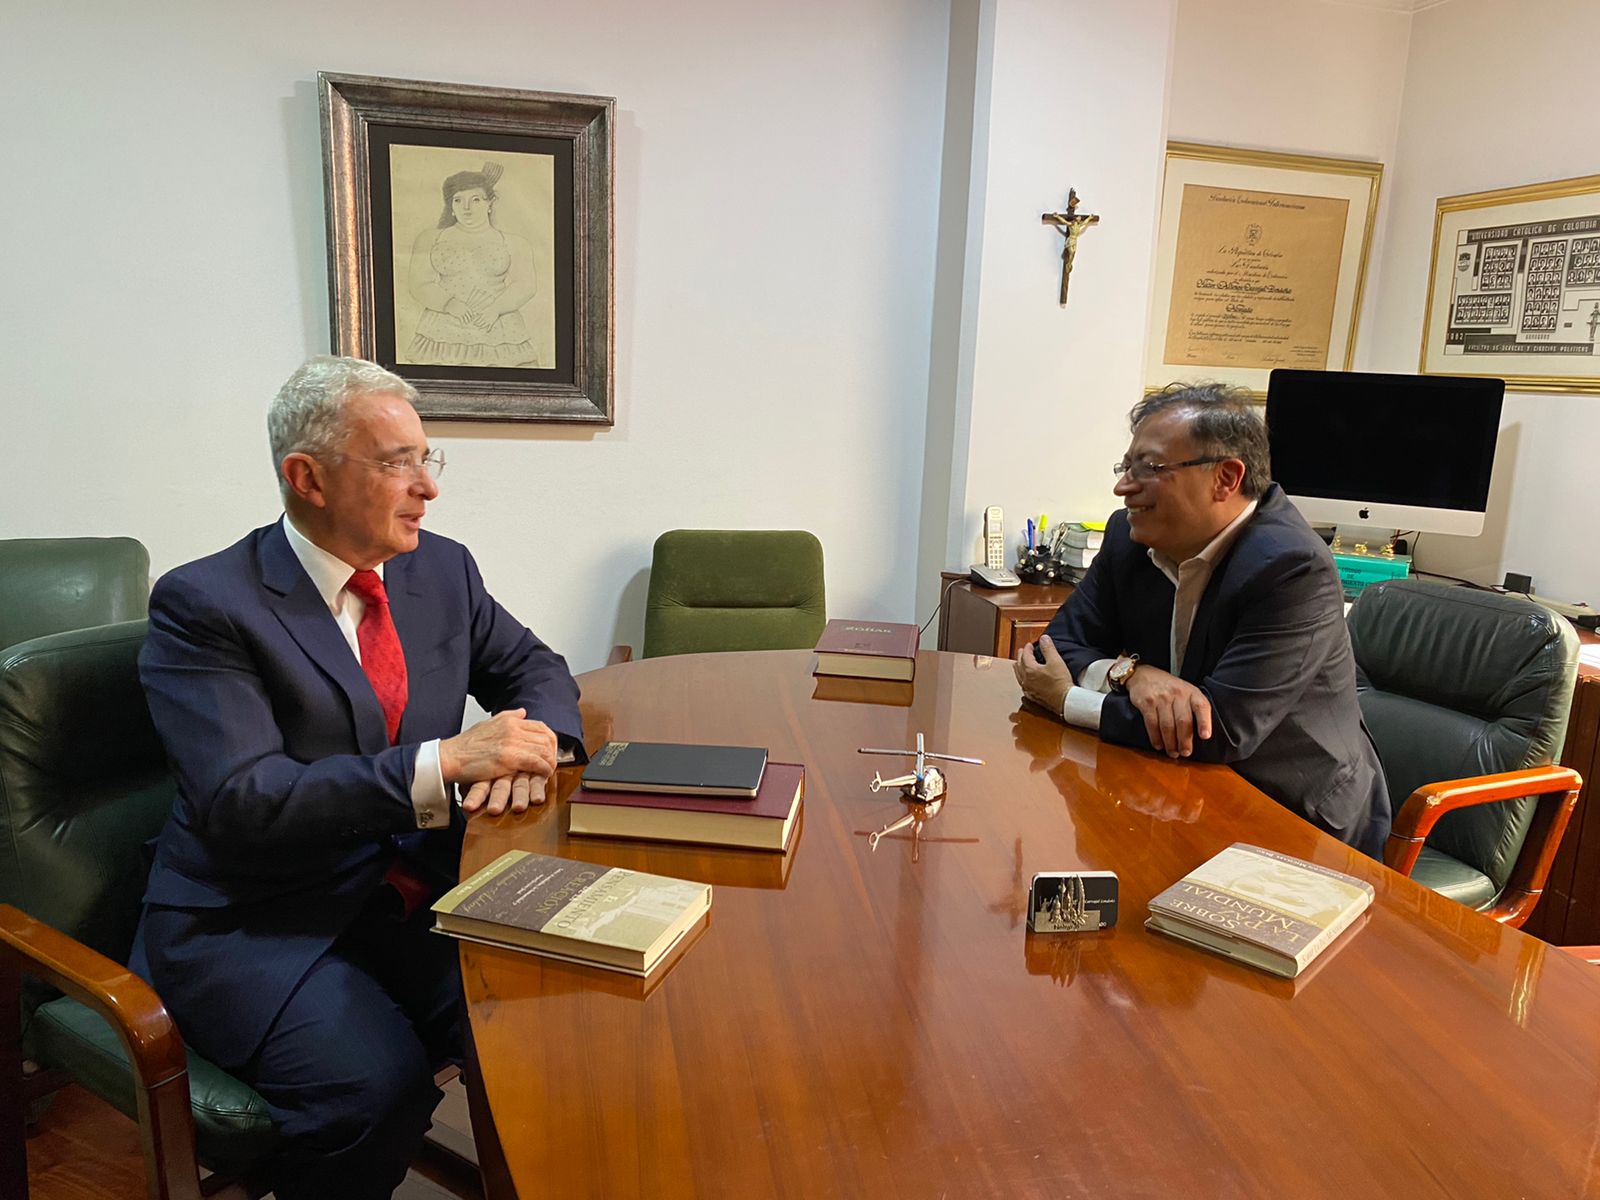 Álvaro Uribe defends Petro and asks that his government not be stigmatized as "neocommunism"